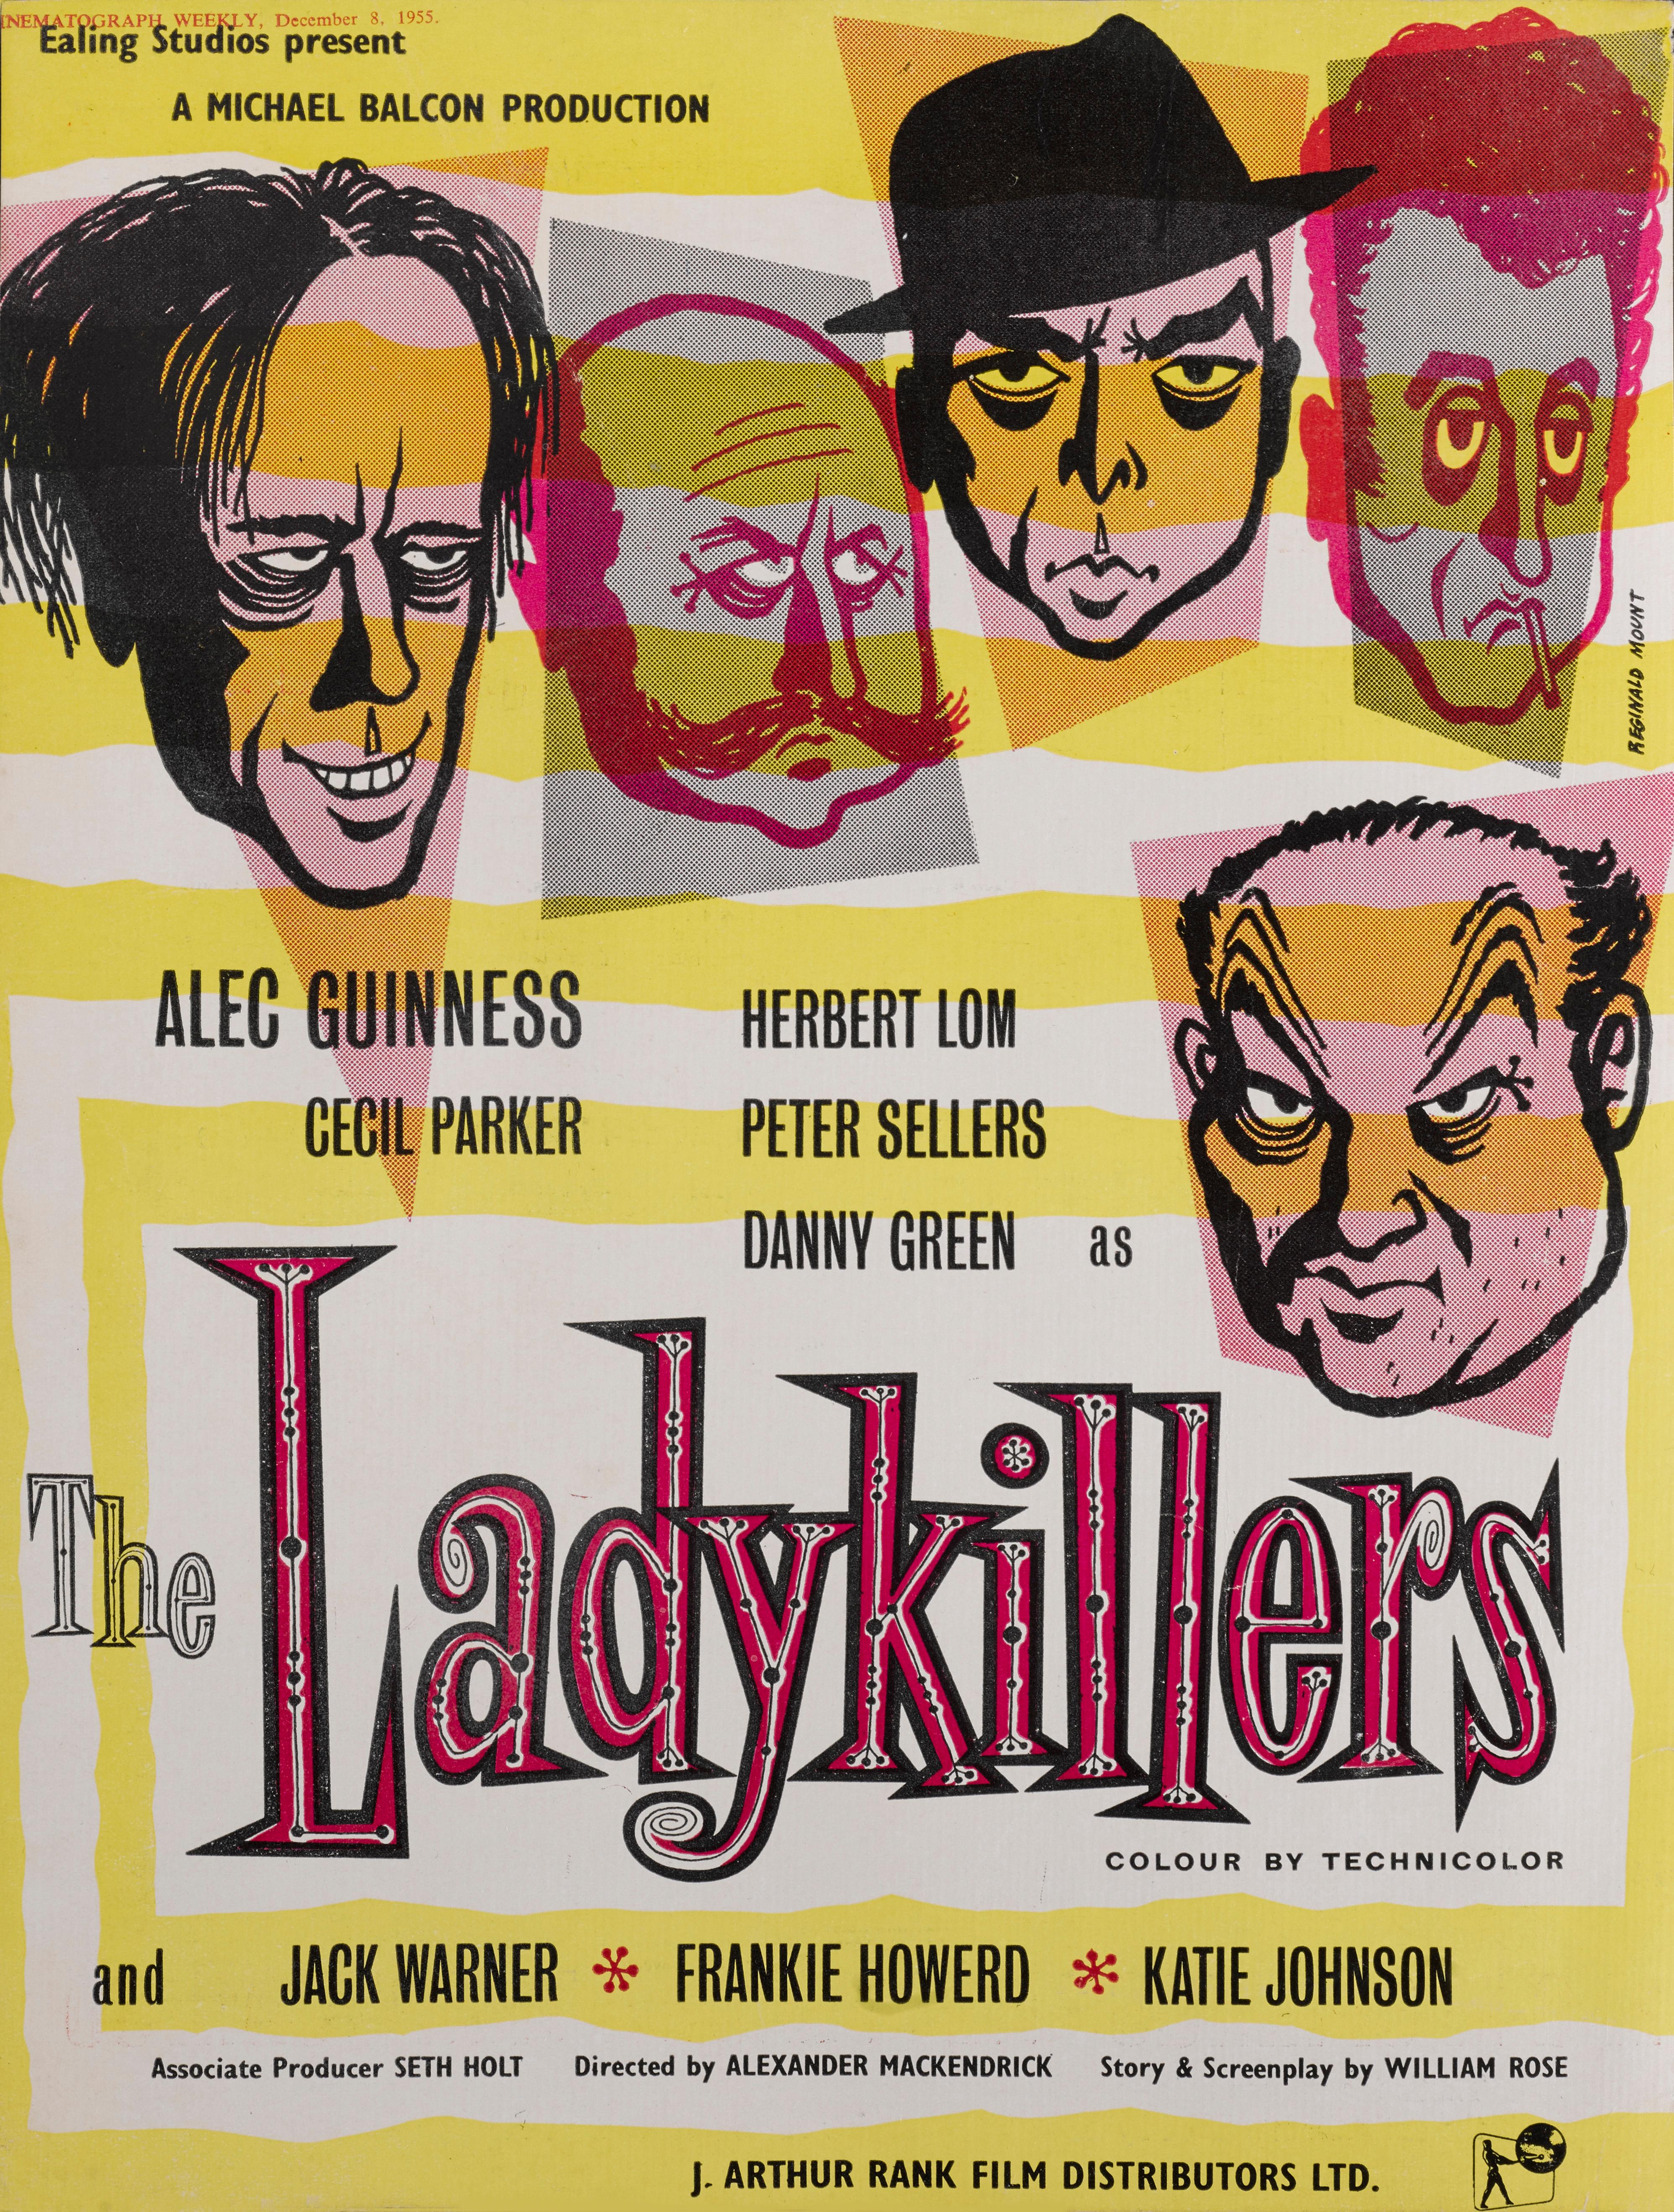 Original 1955 trade advertisement from Kinematograph weekly December 8th 1955. This was part of the advertising campaign in the UK for the Classic Ealing comedy The Ladykillers starring Alec Guinness, Peter Sellers.